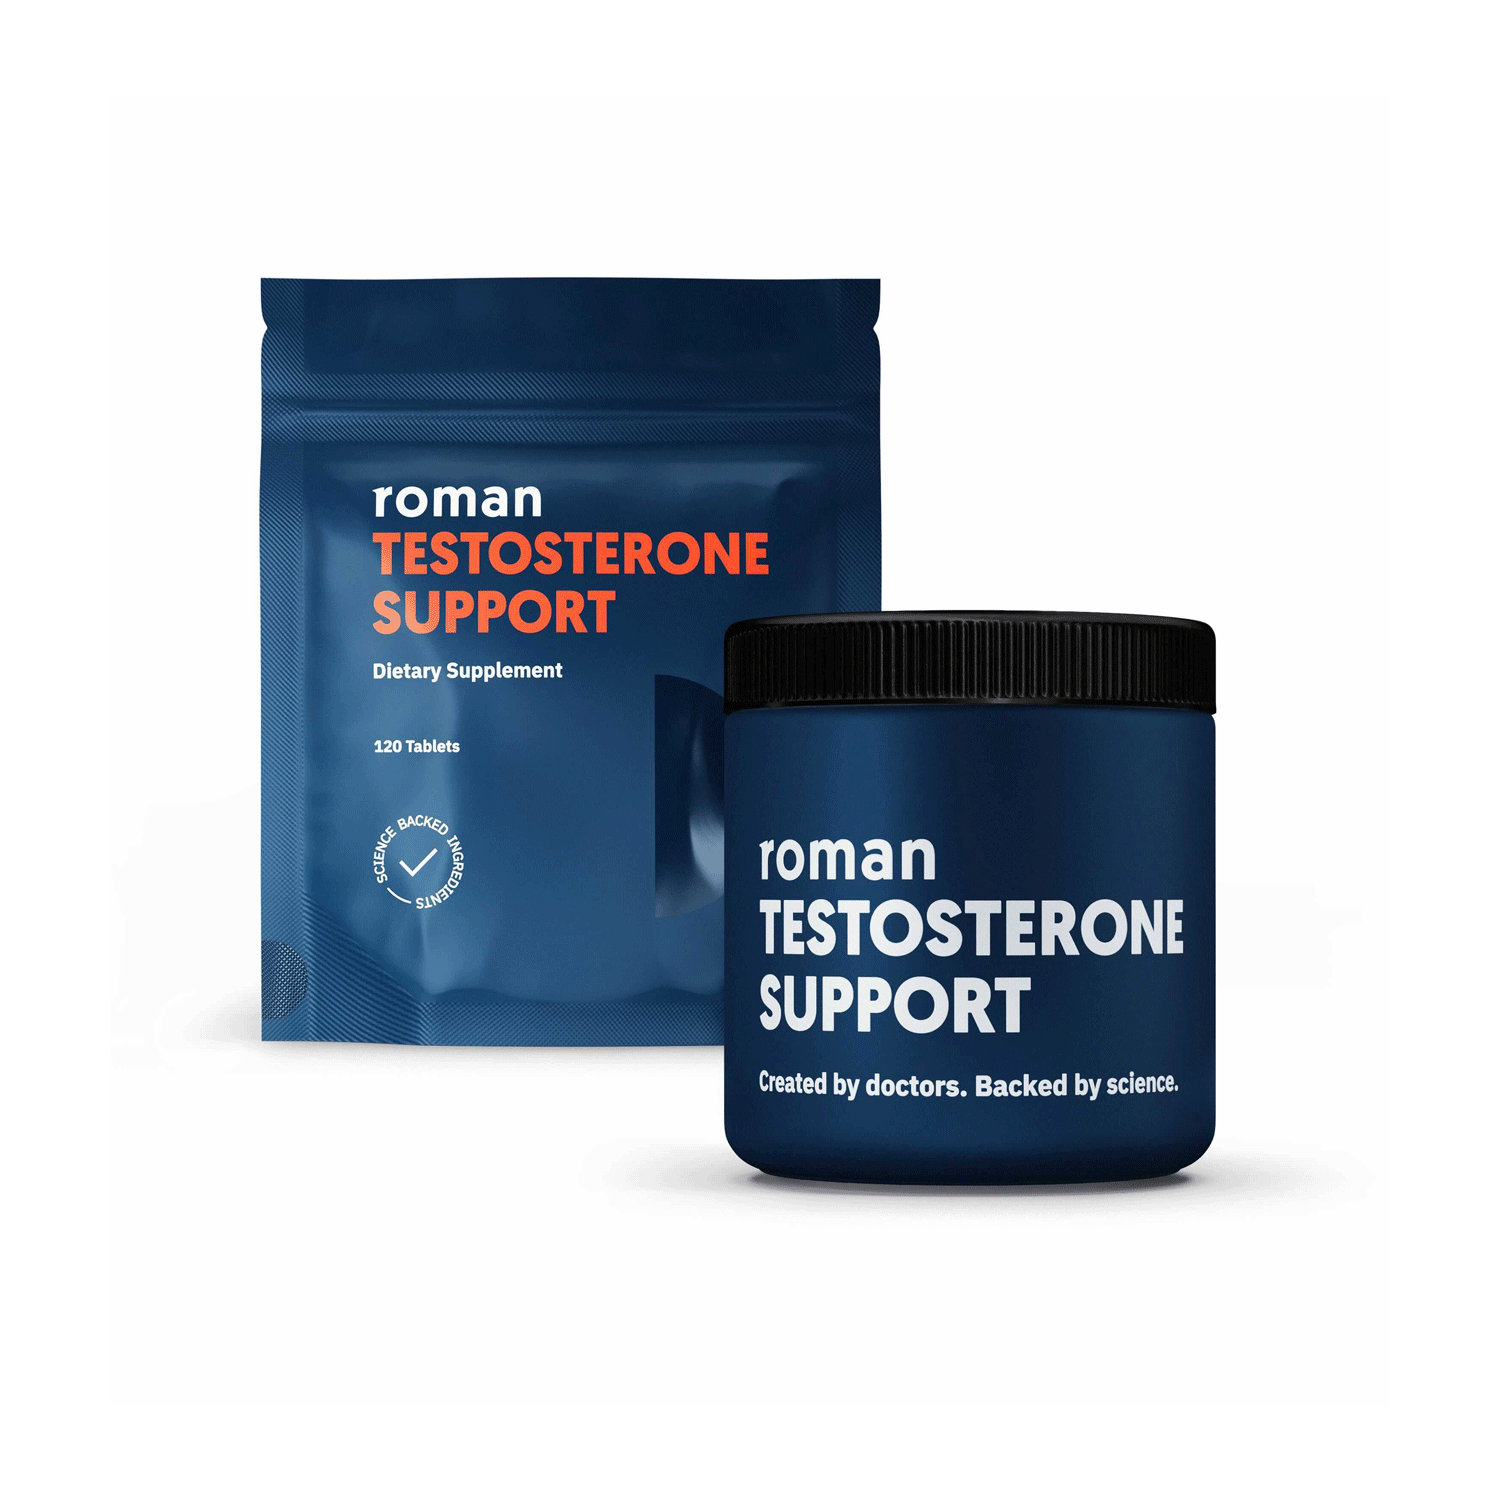 Image showing testosterone support packaging